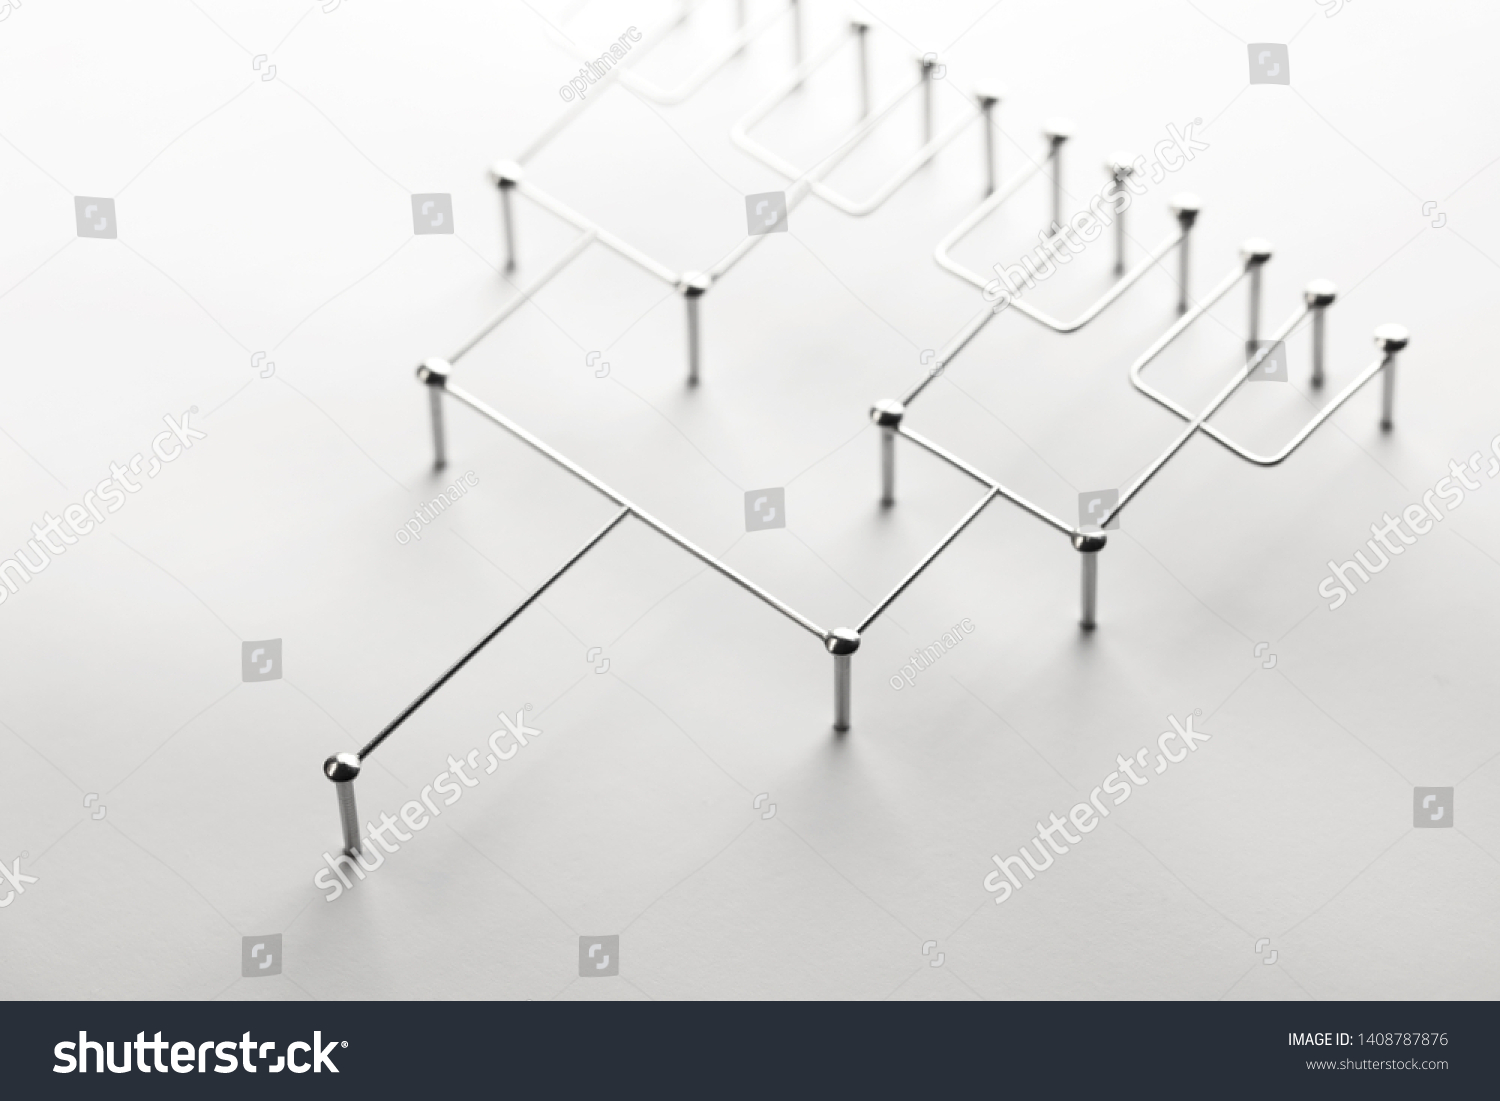 Hierarchy, command chain, company / organization structure or layer concept image. Tournament bracket structure made from chrome wires and nails on white. Shallow depth of field. #1408787876